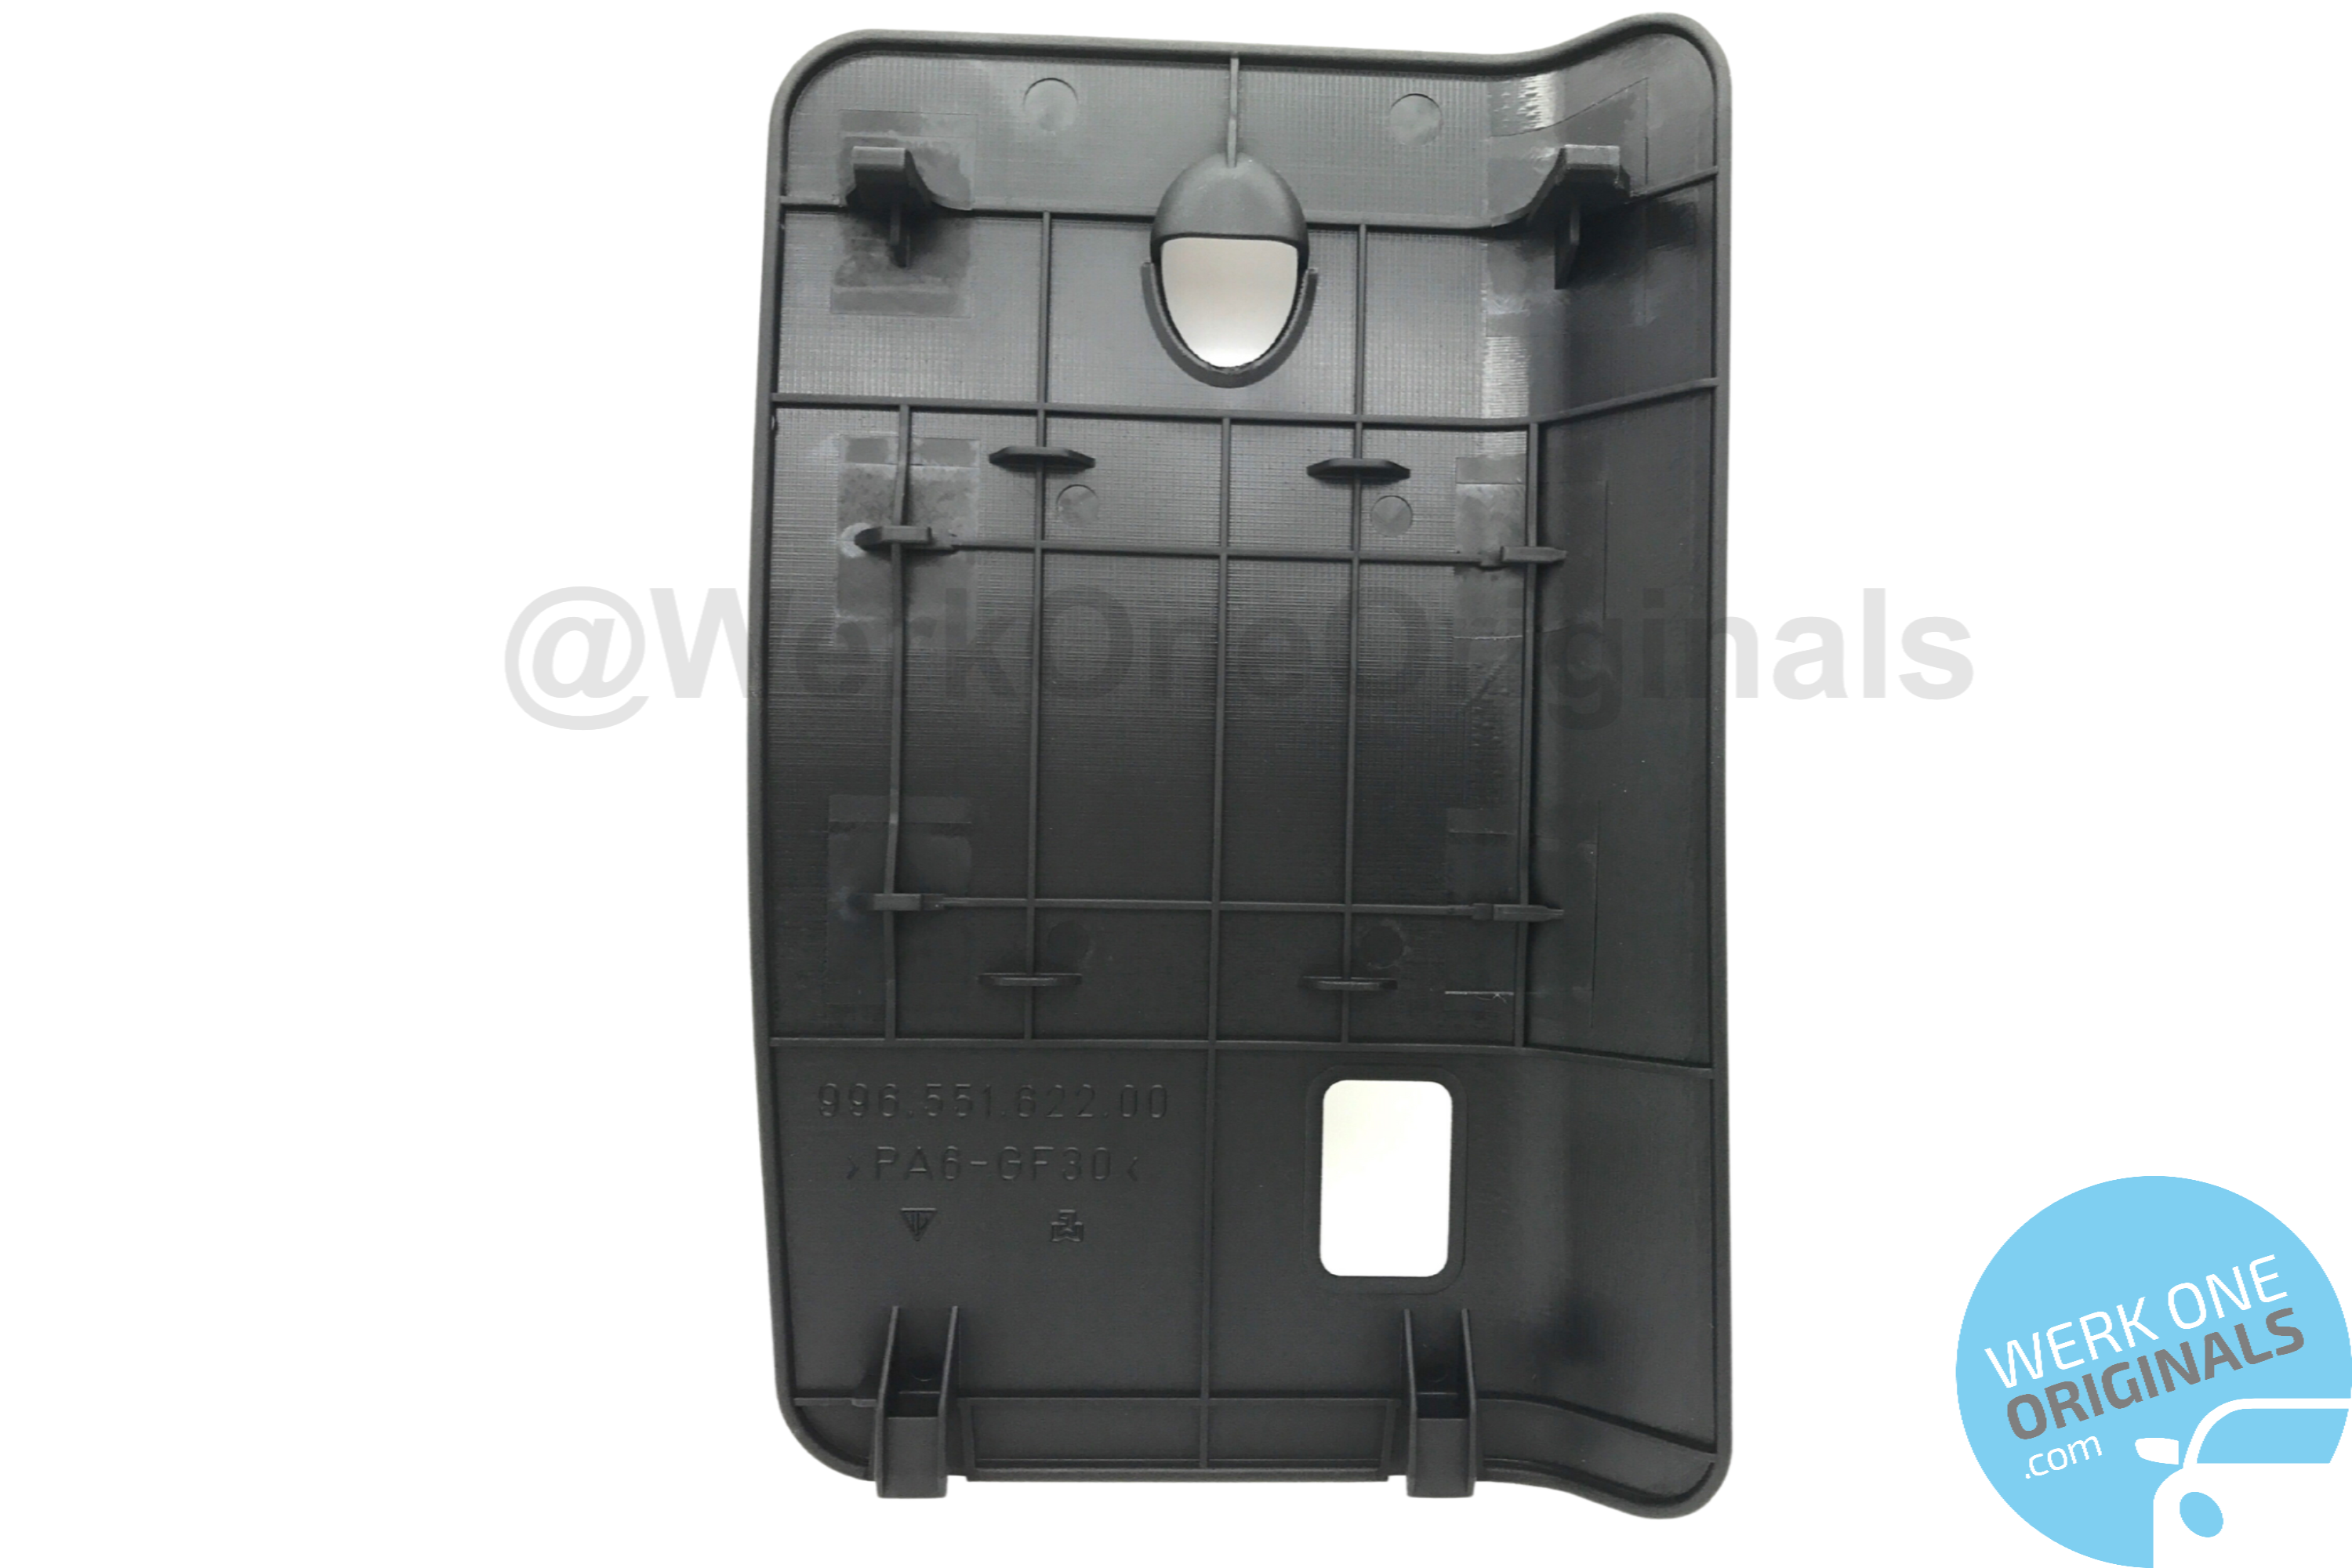 Porsche Fuse Box Cover Lid for Boxster Type 986 RHD Models